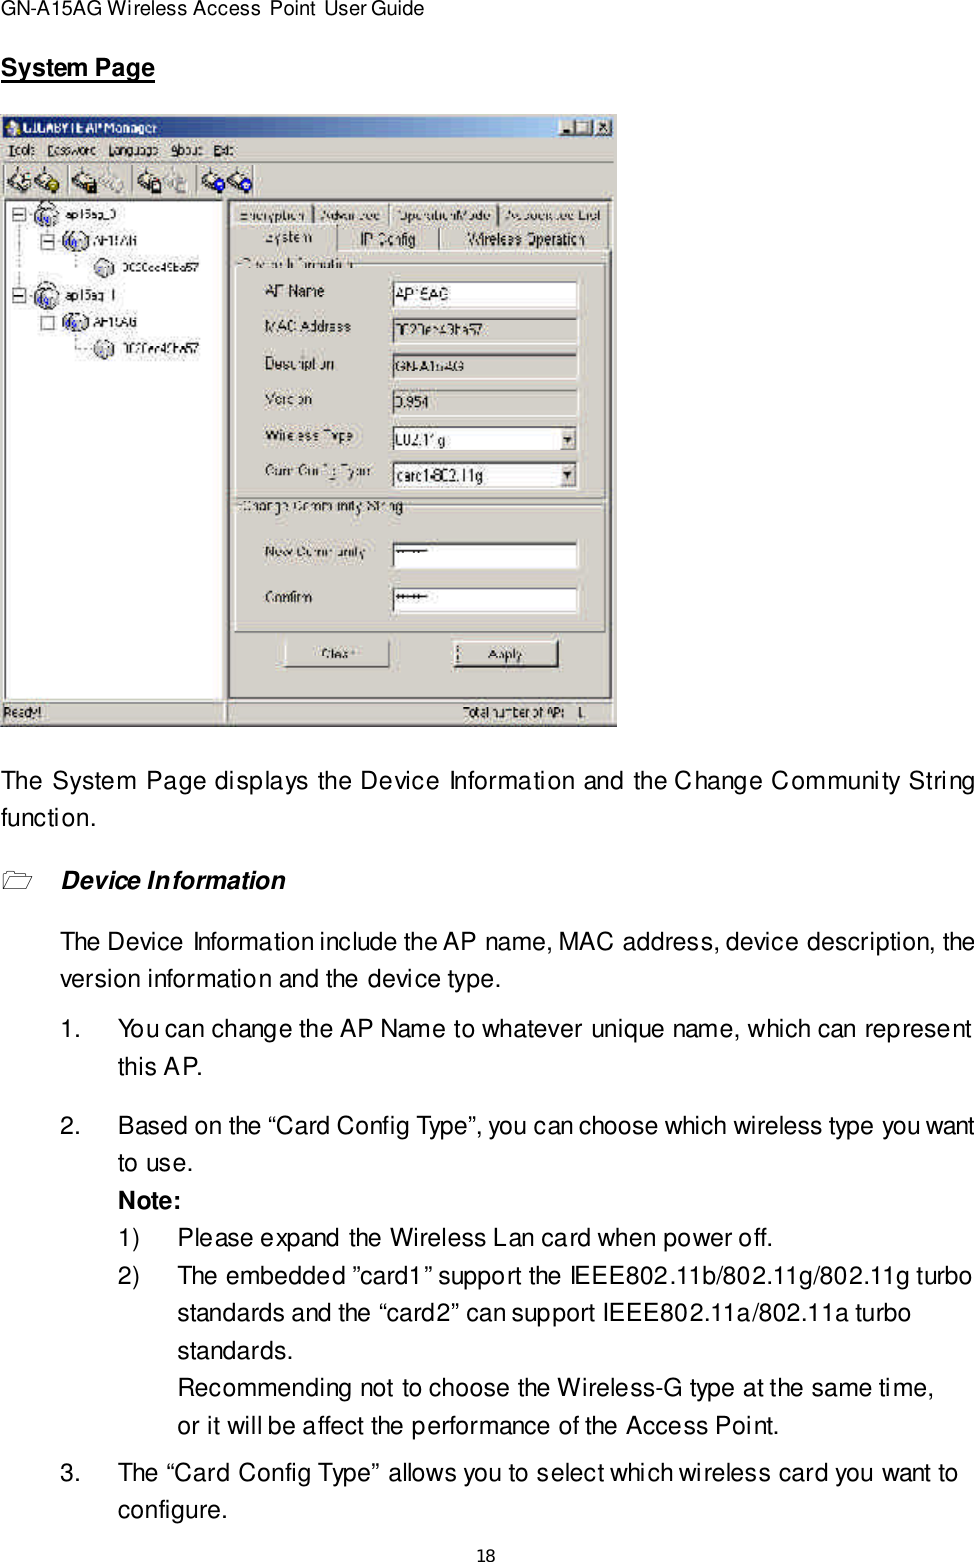 18GN-A15AG Wireless Access Point User GuideSystem PageThe System Page displays the Device Information and the Change Community Stringfunction.1Device InformationThe Device Information include the AP name, MAC address, device description, theversion information and the device type.2.Based on the “Card Config Type”, you can choose which wireless type you wantto use.Note:1)Please expand the Wireless Lan card when power off.2)The embedded ”card1” support the IEEE802.11b/802.11g/802.11g turbostandards and the “card2” can support IEEE802.11a/802.11a turbostandards.Recommending not to choose the Wireless-G type at the same time,or it will be affect the performance of the Access Point.1.You can change the AP Name to whateverunique name, which can representthis AP.3.The “Card Config Type” allows you to select which wireless card you want toconfigure.